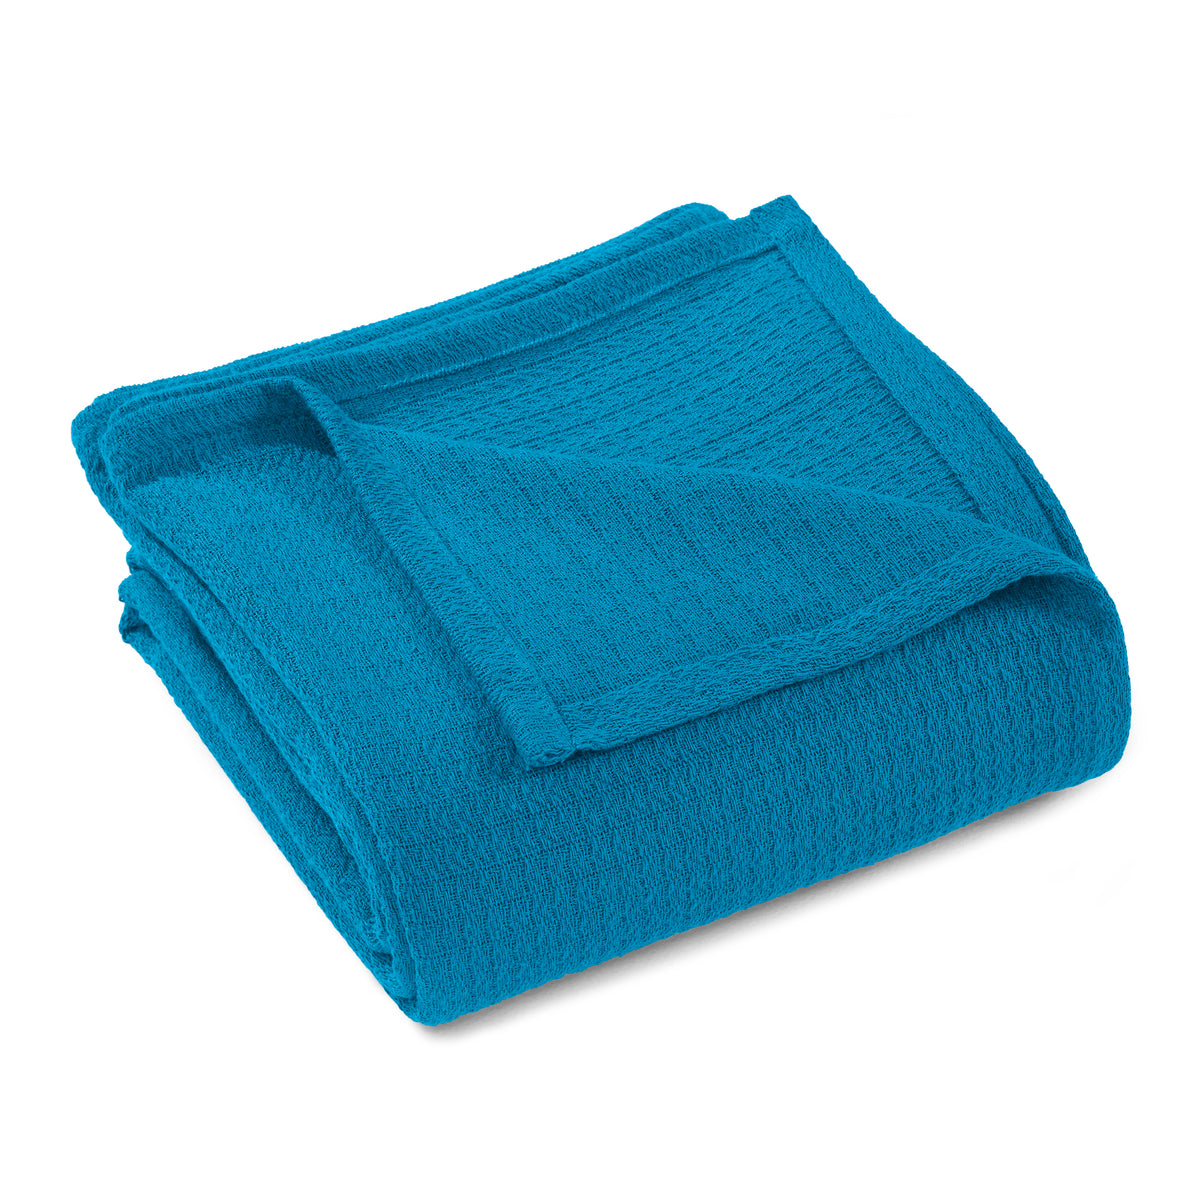 Waffle Weave Honeycomb Knit Soft Solid Textured Cotton Blanket - Azure 